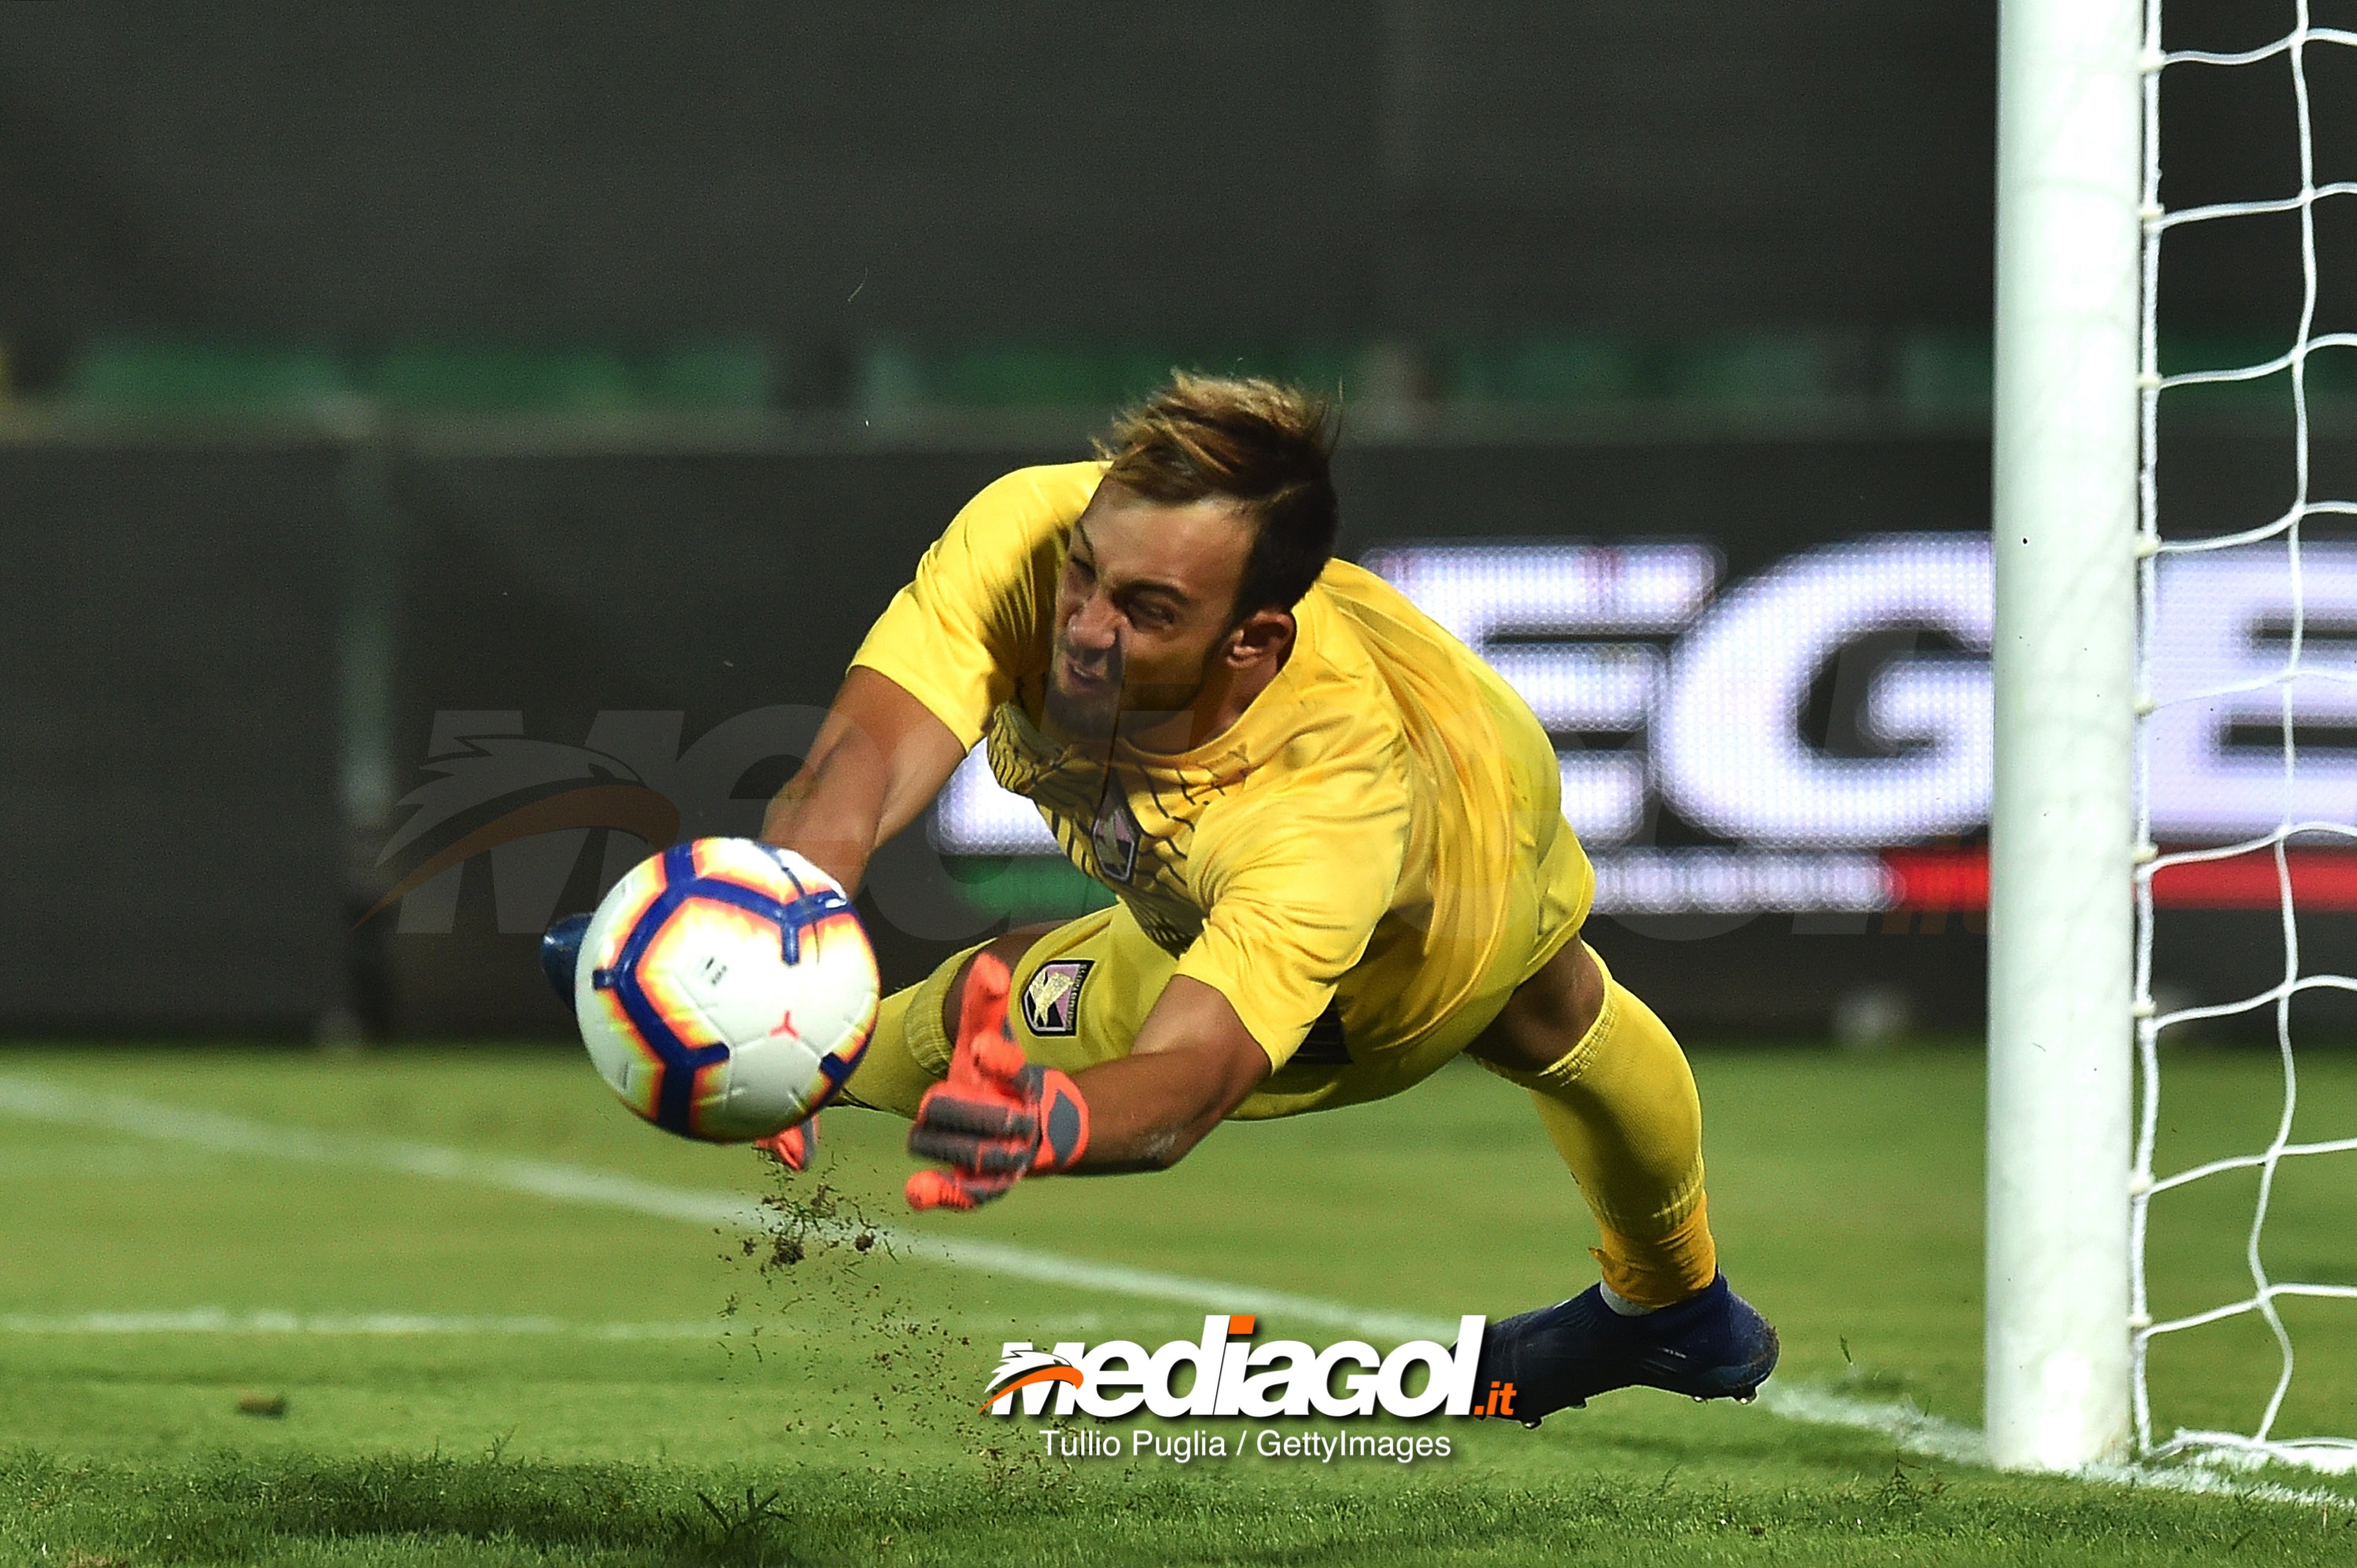 PALERMO, ITALY - AUGUST 05:  Alberto Brignoli goalkeeper of Palermo saves a penalty during the TIM Cup match between US Citta' di Palermo and Vicenza Calcio at Stadio Renzo Barbera on August 5, 2018 in Palermo, Italy.  (Photo by Tullio M. Puglia/Getty Images)